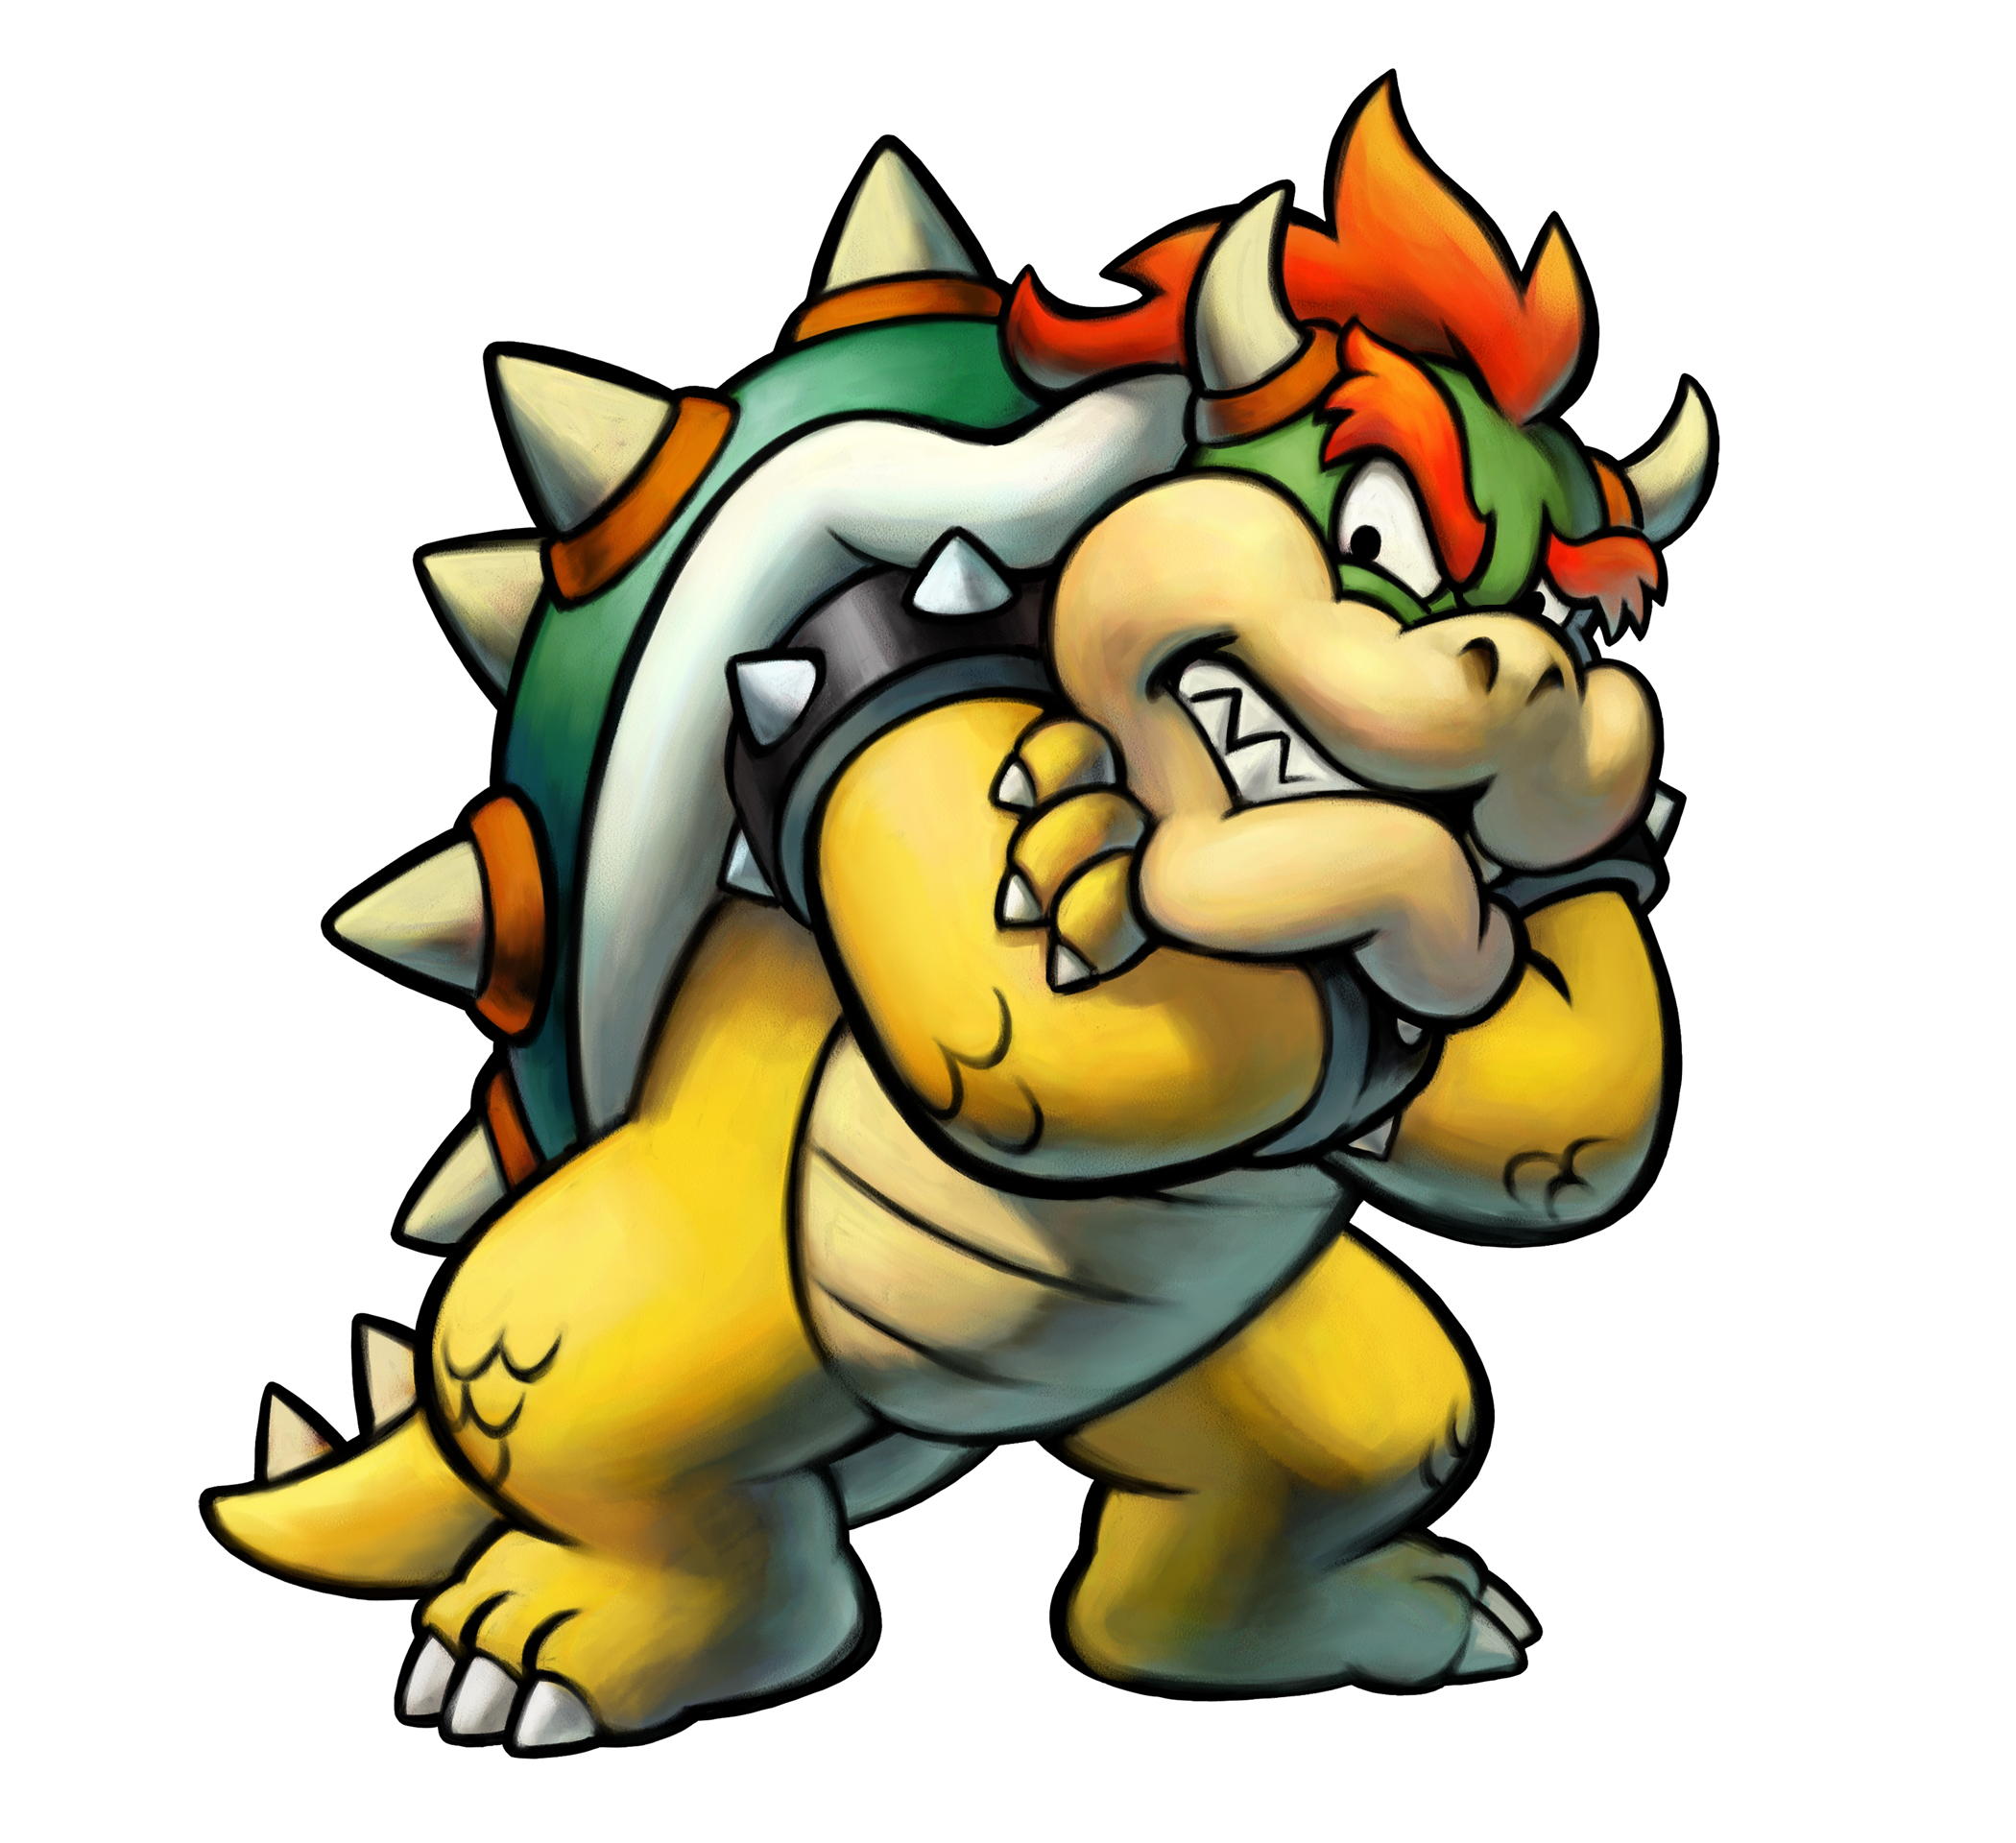 Goomba Koopa Paratroopa And Shy Clipart   Free Clip Art Images